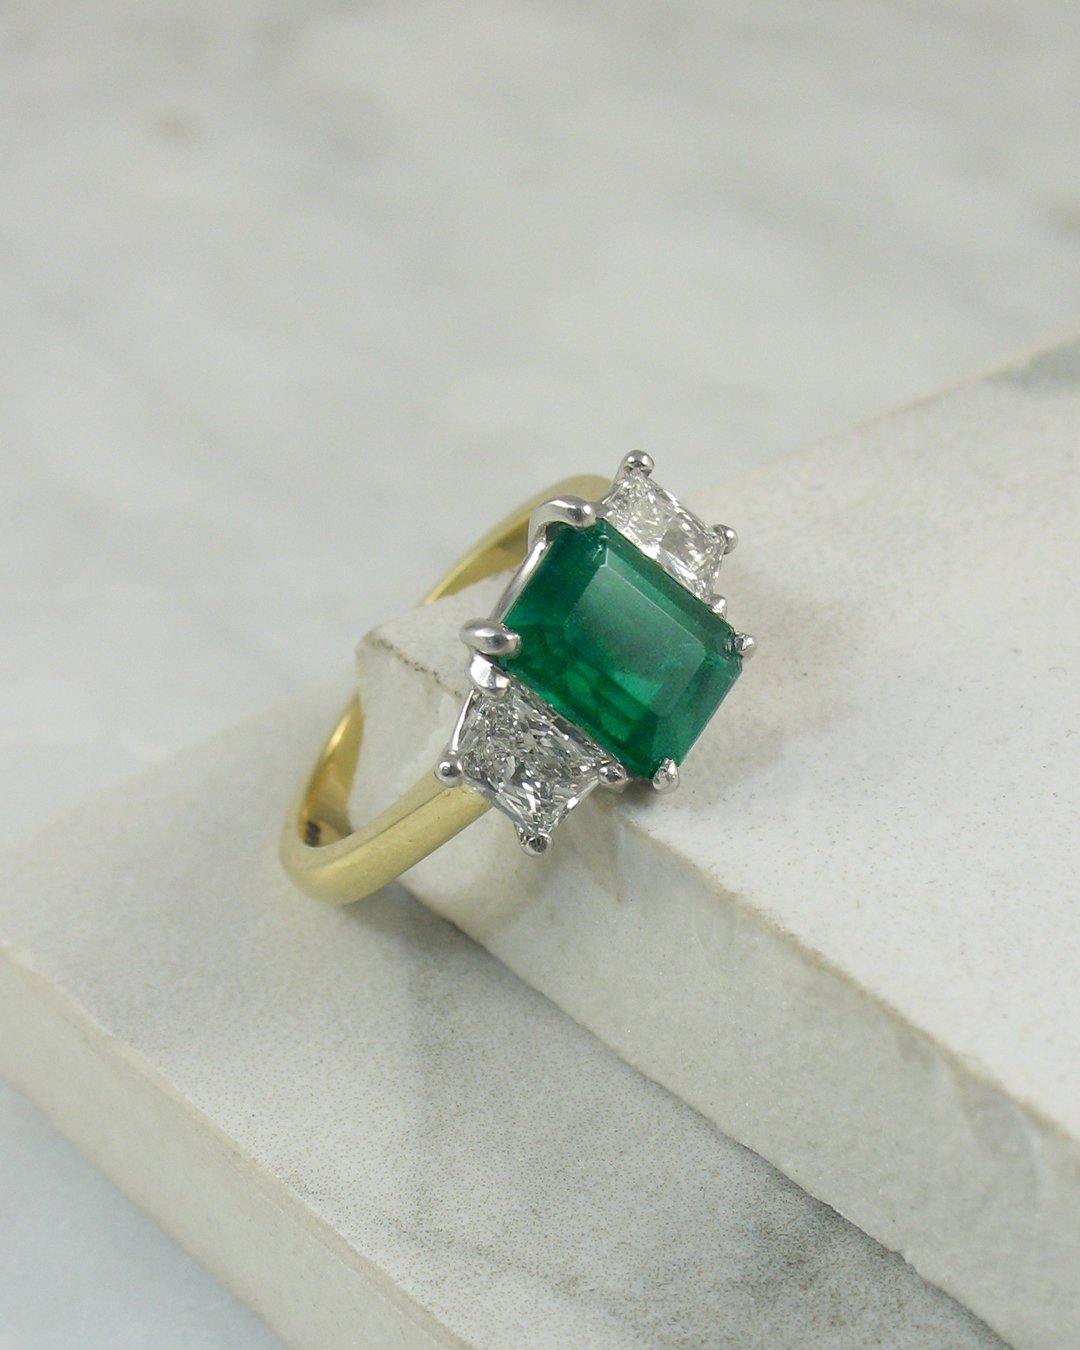 An exquisite emerald engagement ring 